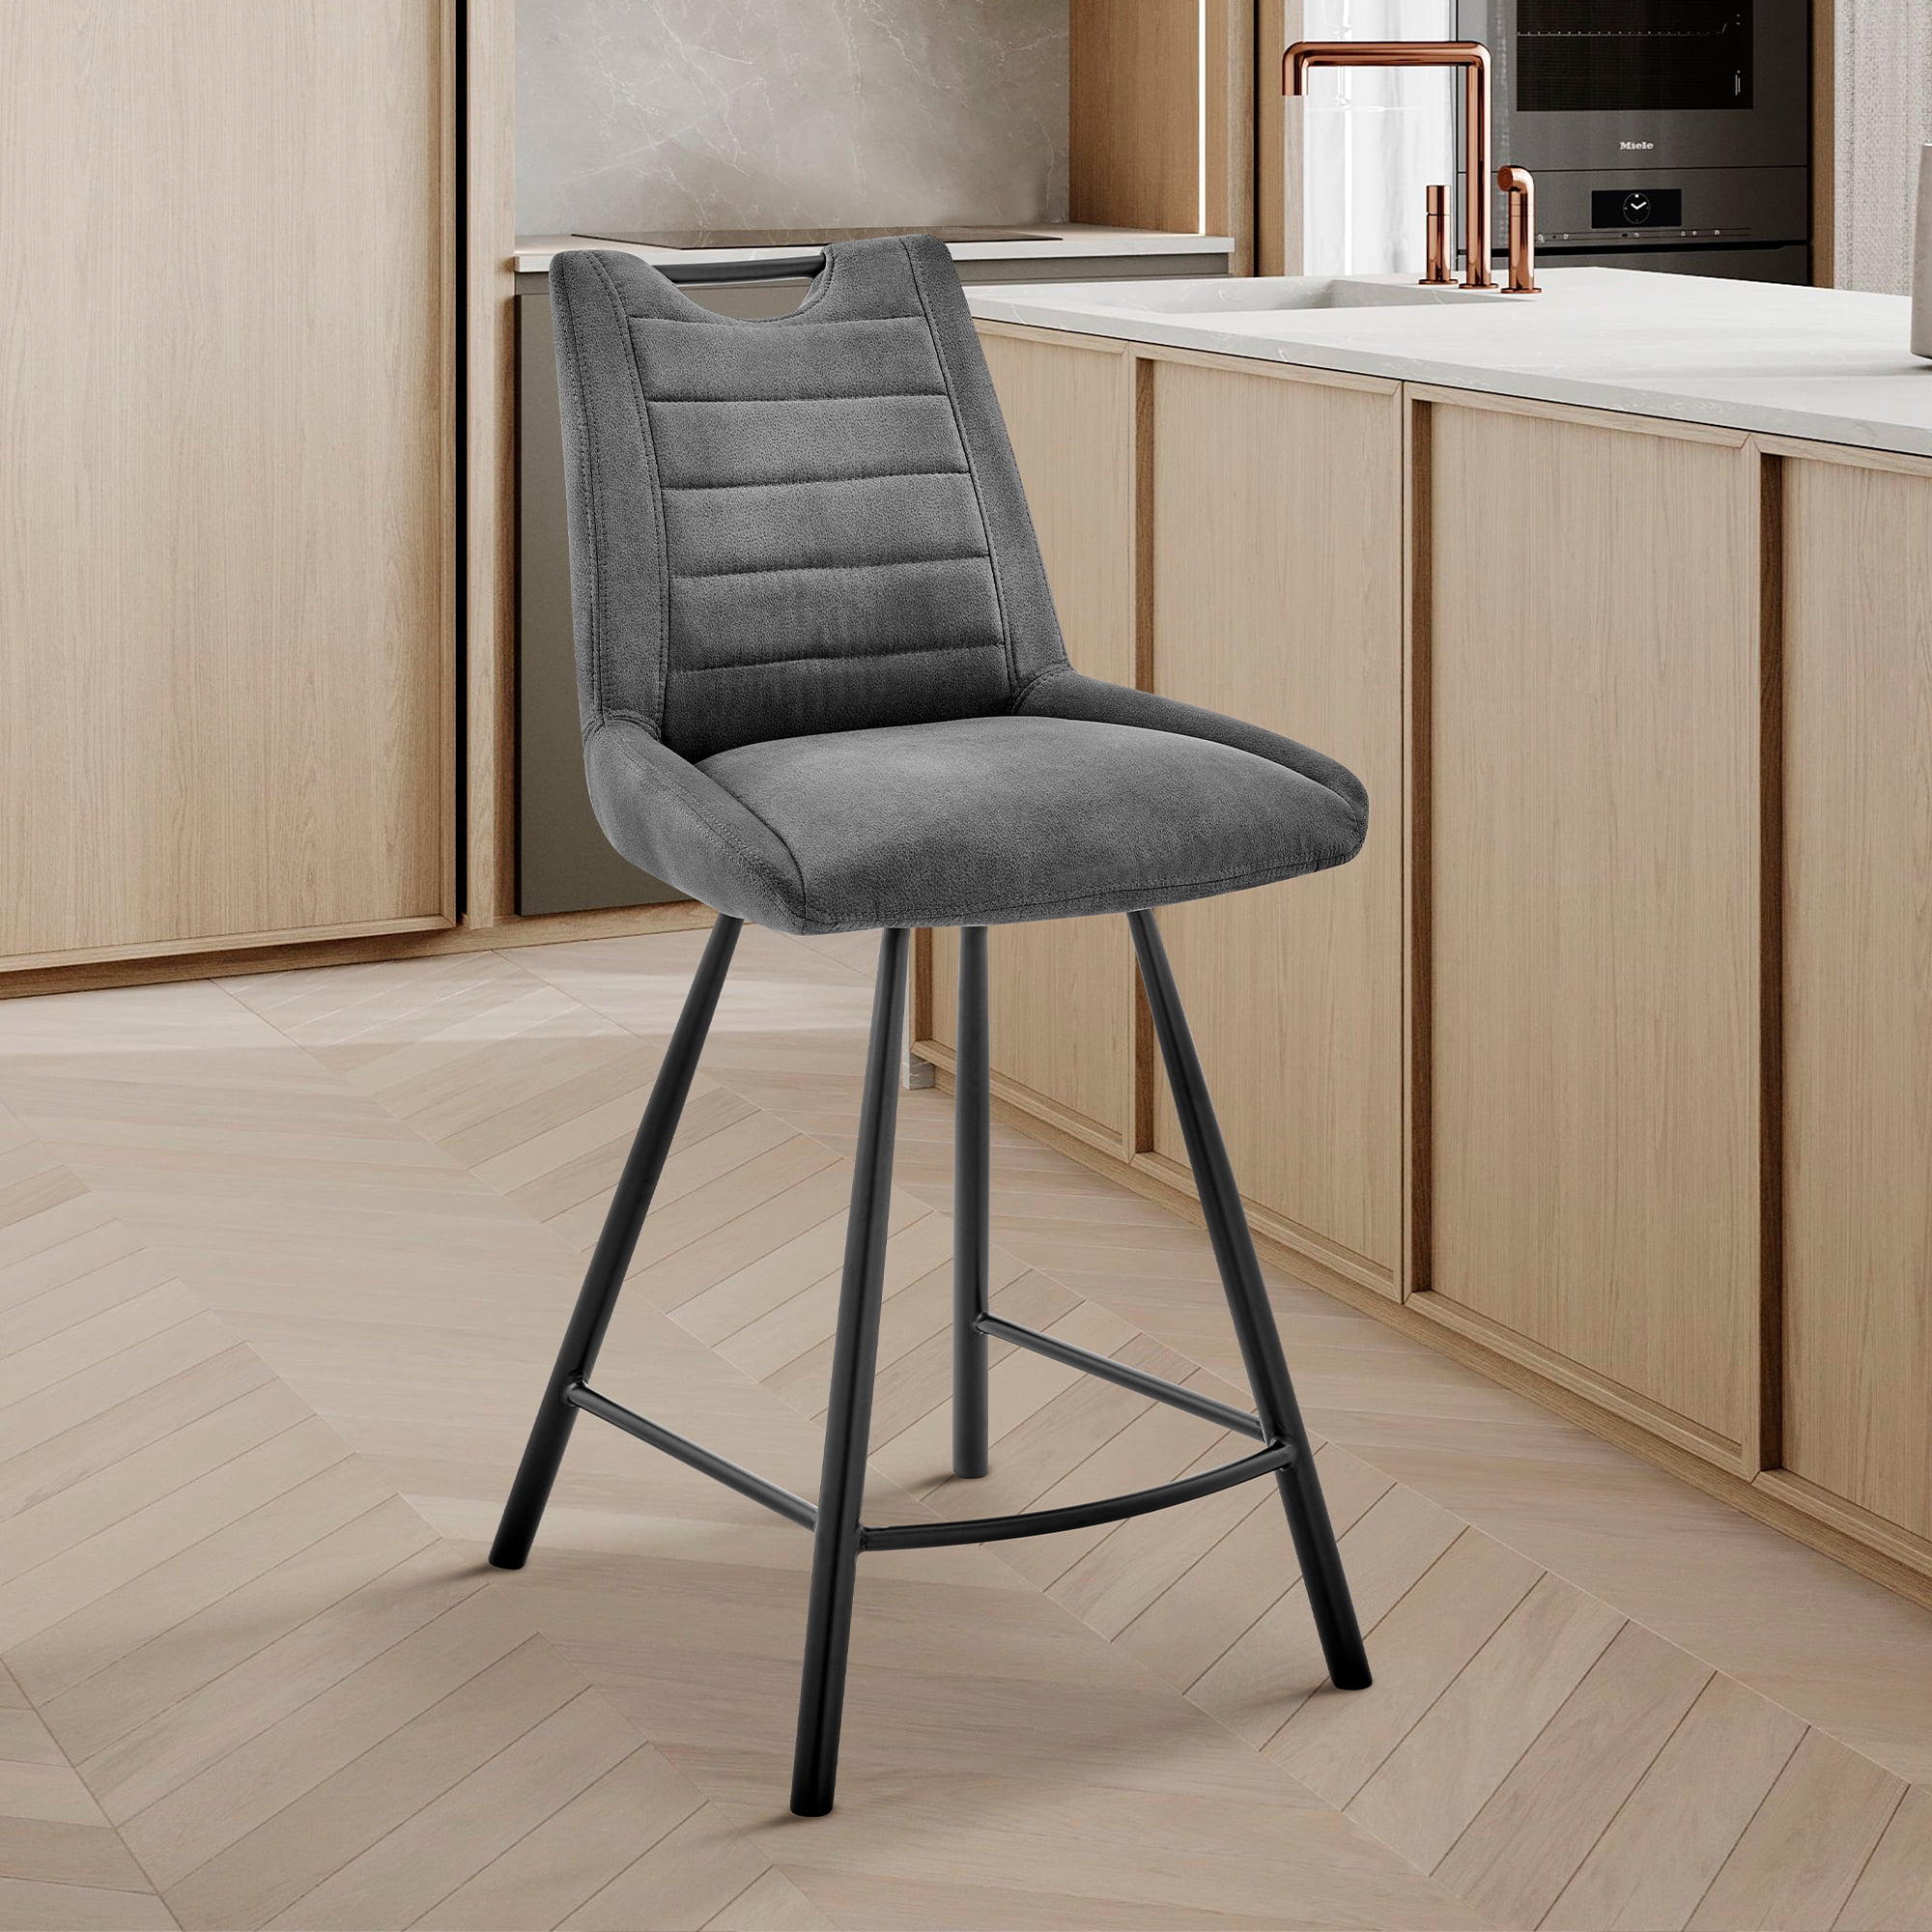 Picture of Armen Living LCAZBACH26 26 in. Arizona Counter Height Bar Stool in Charcoal Fabric & Black Finish